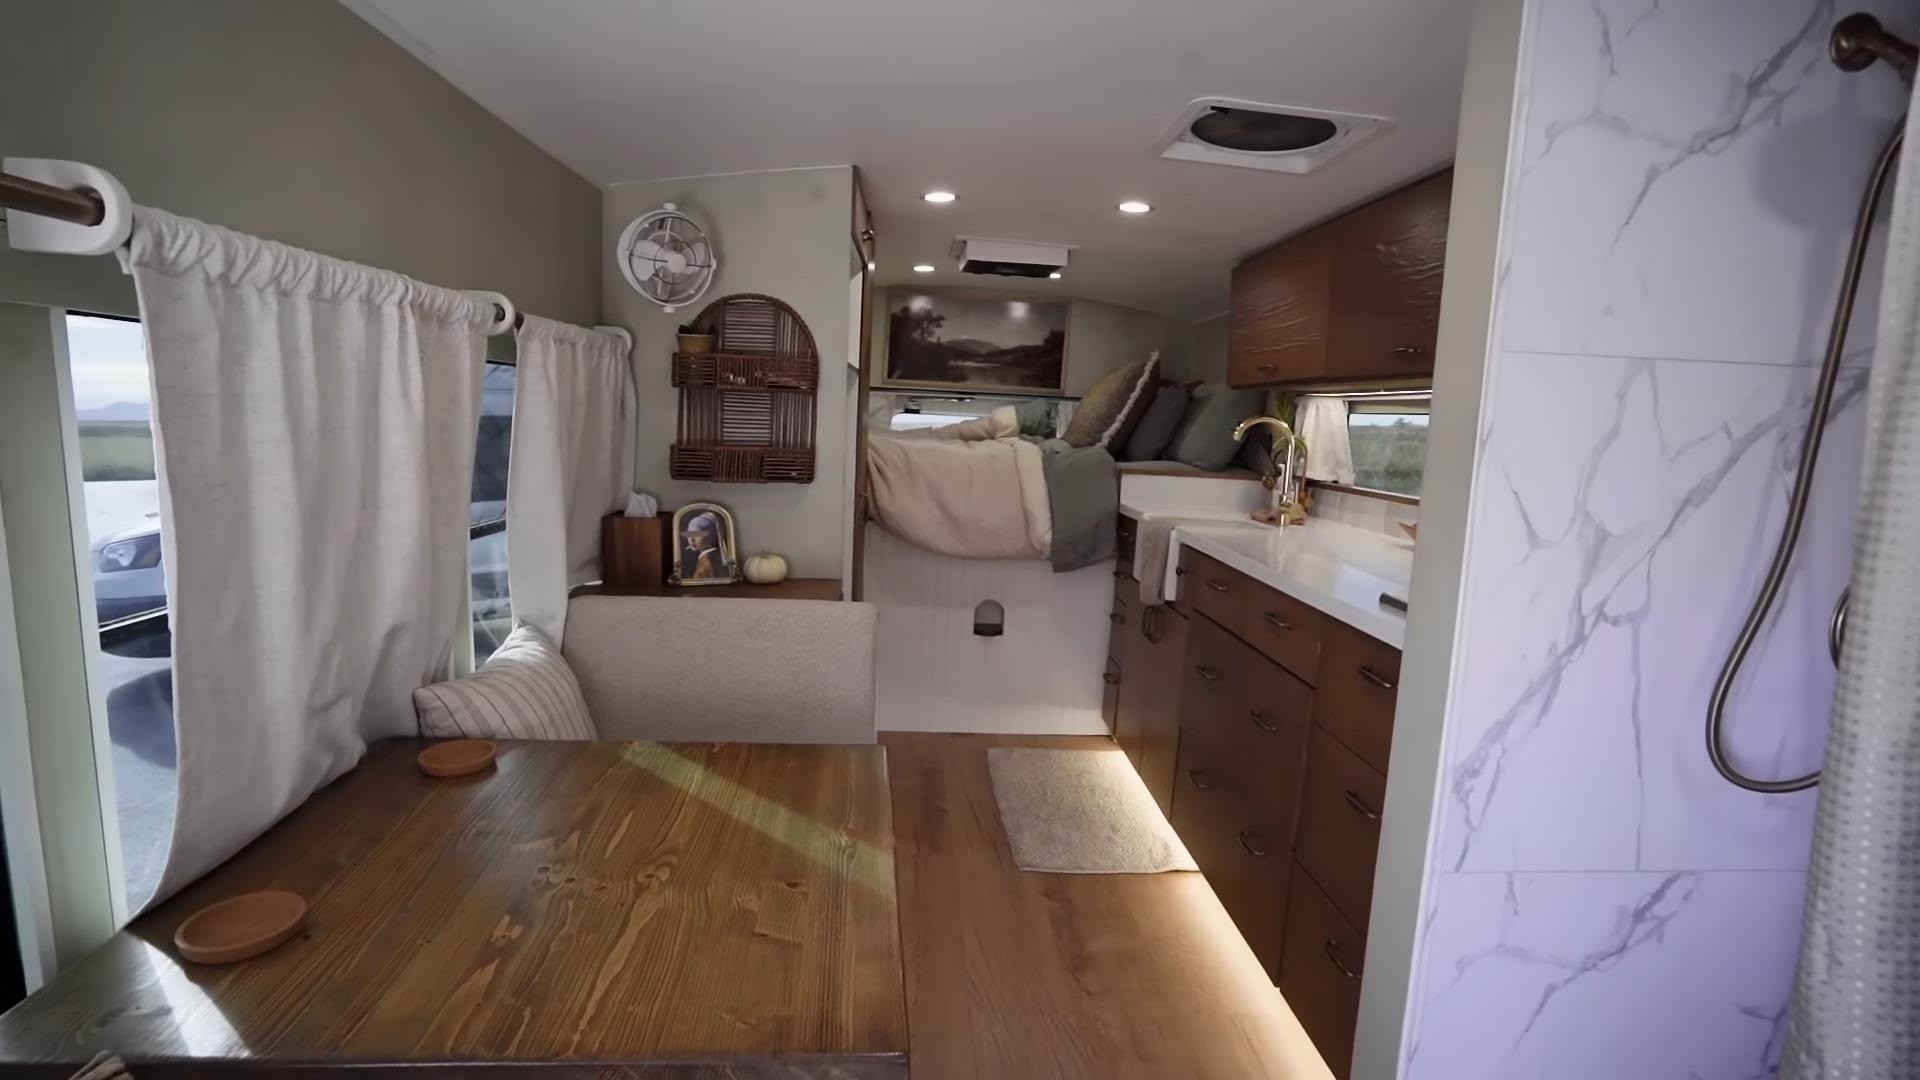 Couple Transformed Their 200-Square-Foot RV Into a Dream Home